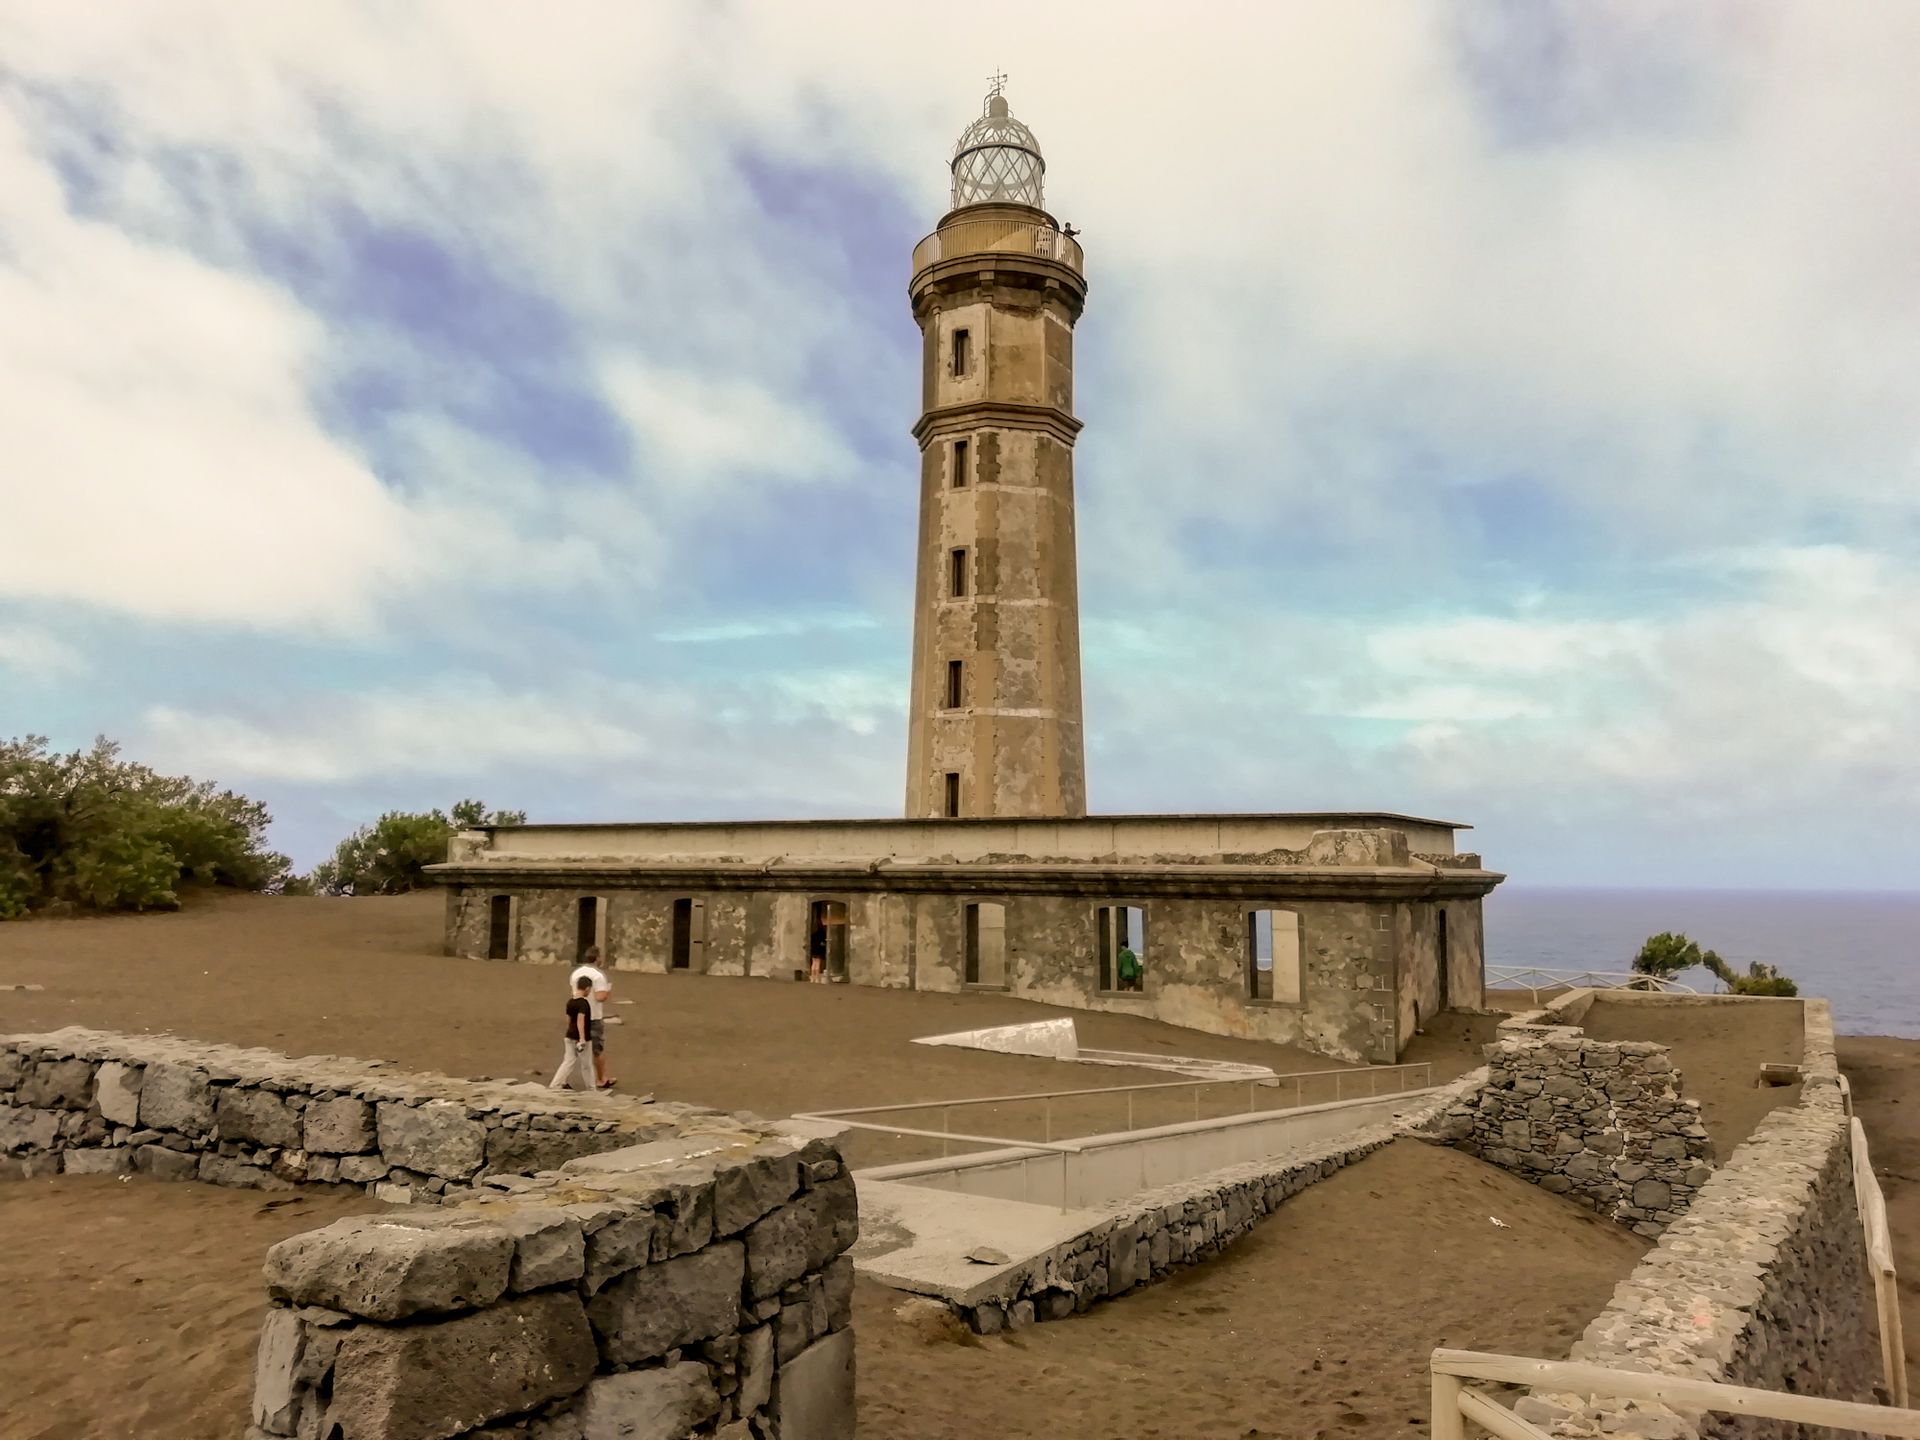 Visit the Capelinhos Lighthouse on our half-day Excursions, Tours and Guided Visits on the island of Faial Azores.